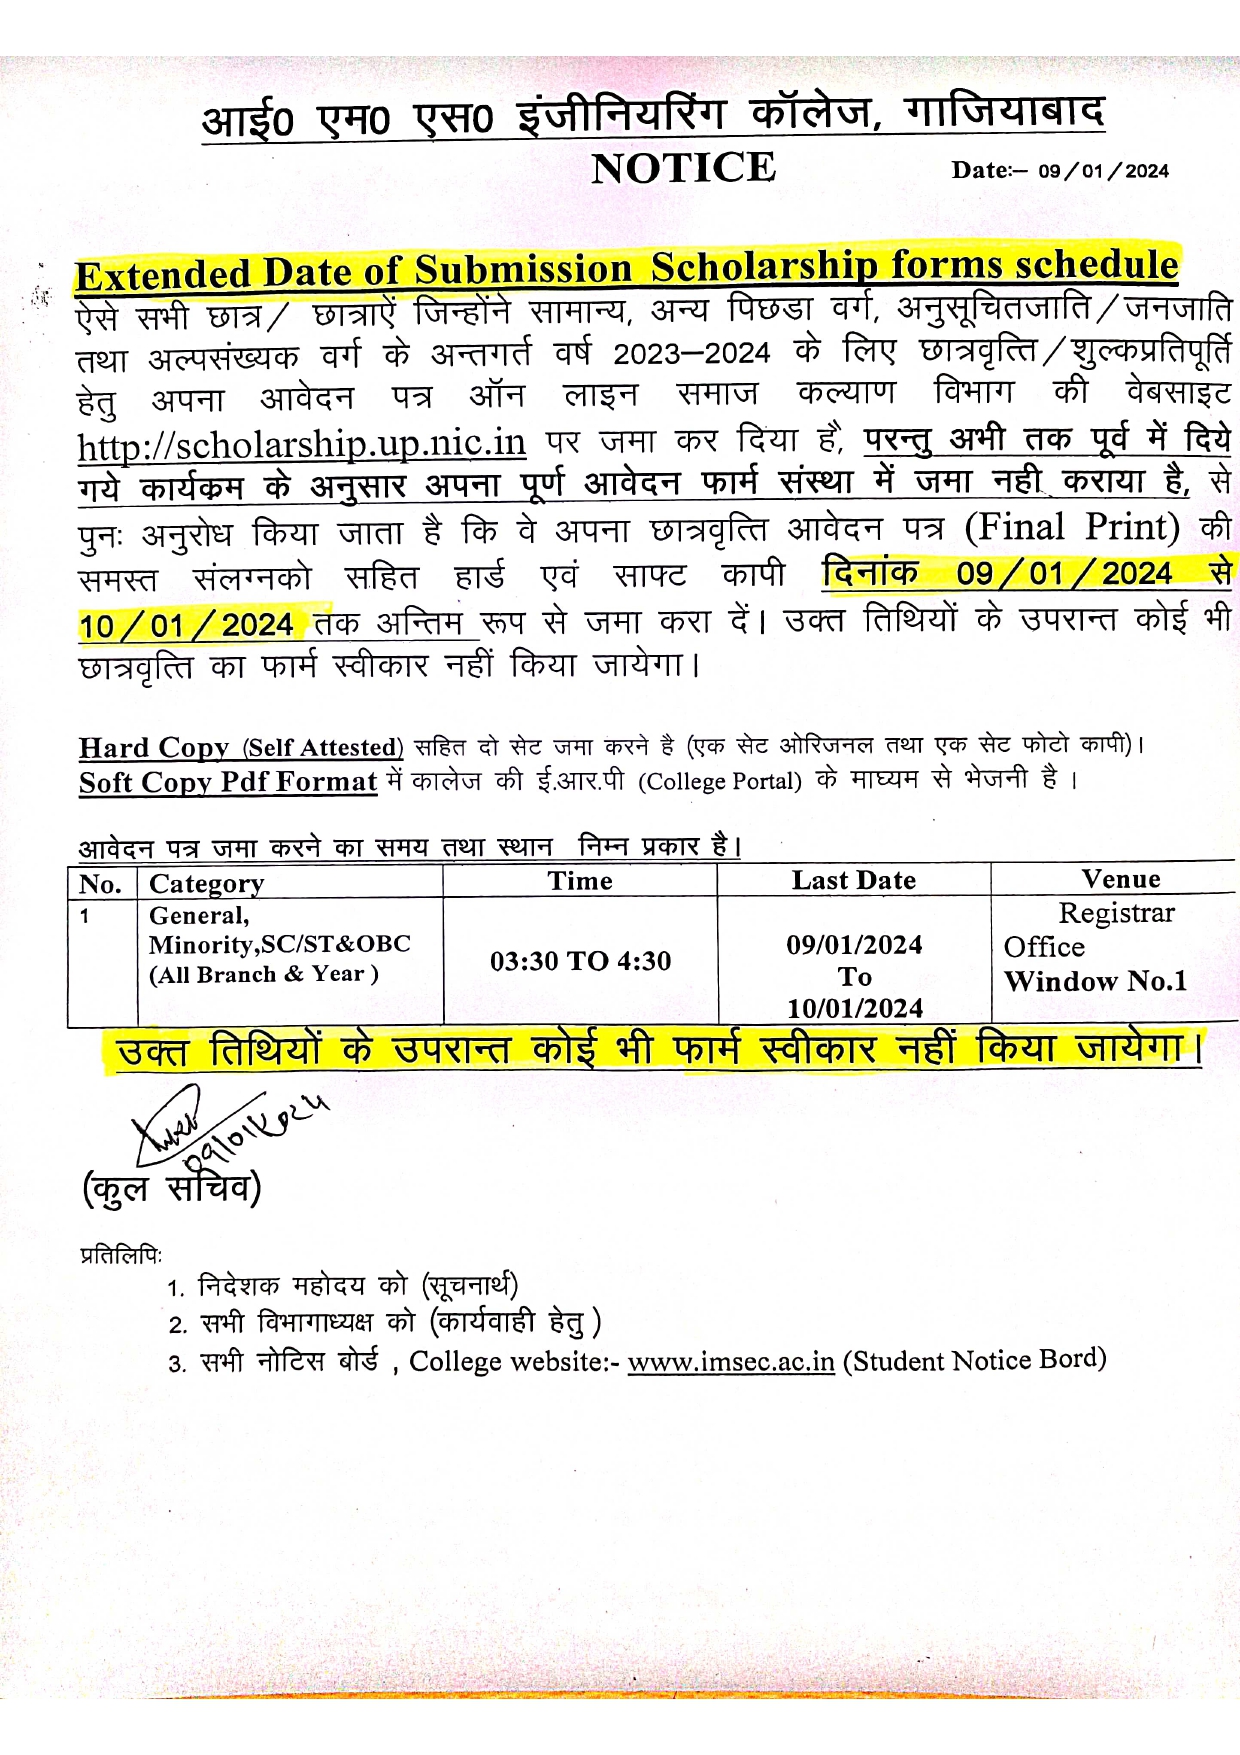 Extended date of submission scholarship forms schedule.(last date 10-01-2024)